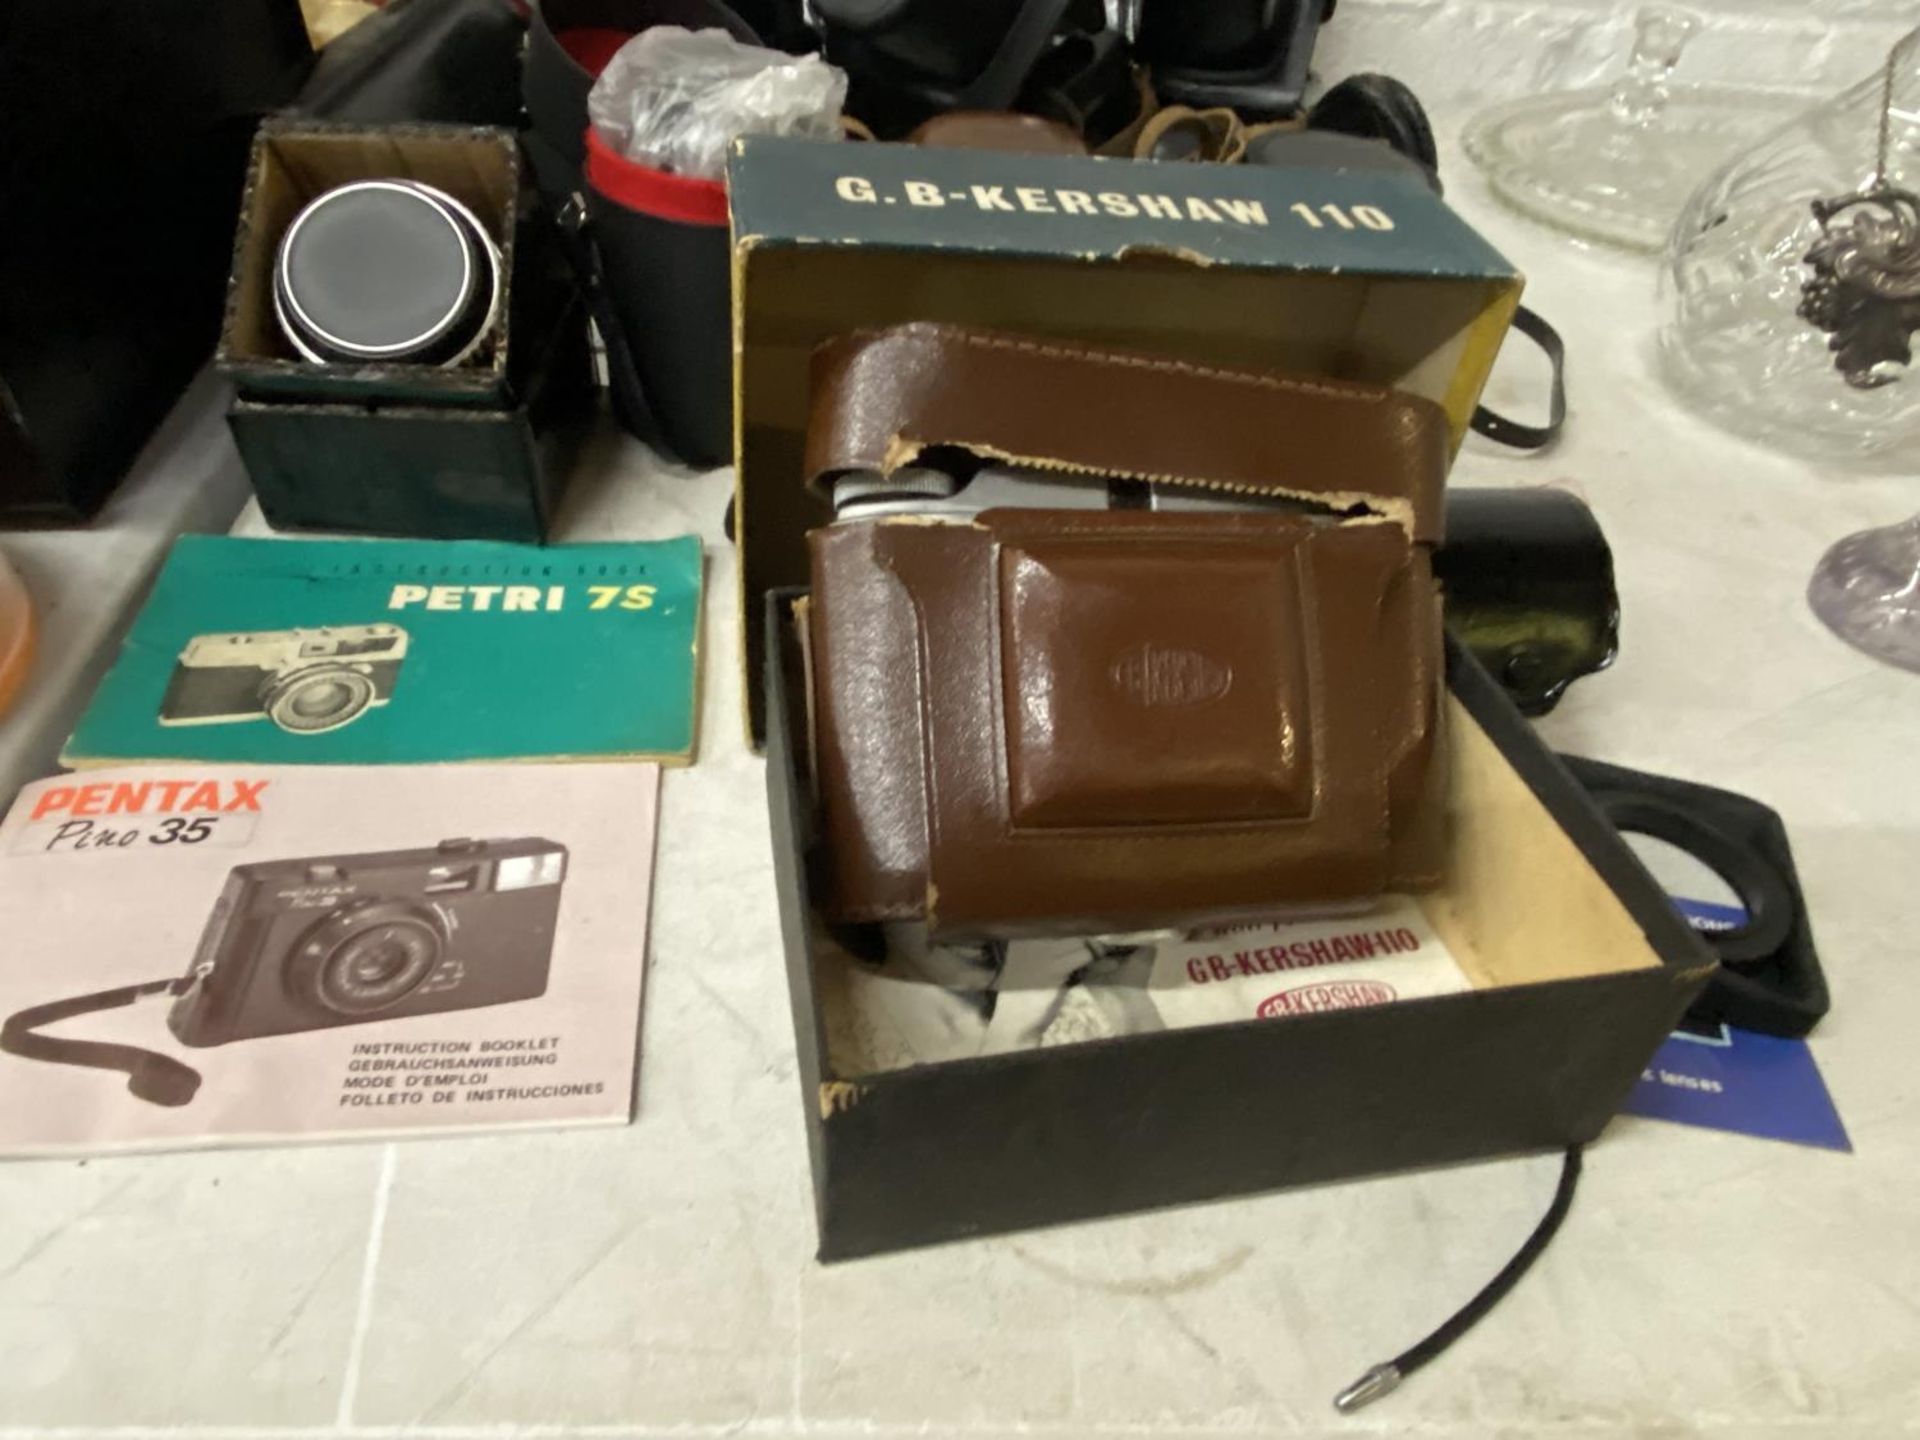 A QUANTITY OF VINTAGE CAMERAS TO INCLUDE A FUJICA ZENIT EM IN CASE, G B KERSHAW 110 IN ORIGINAL - Image 2 of 4